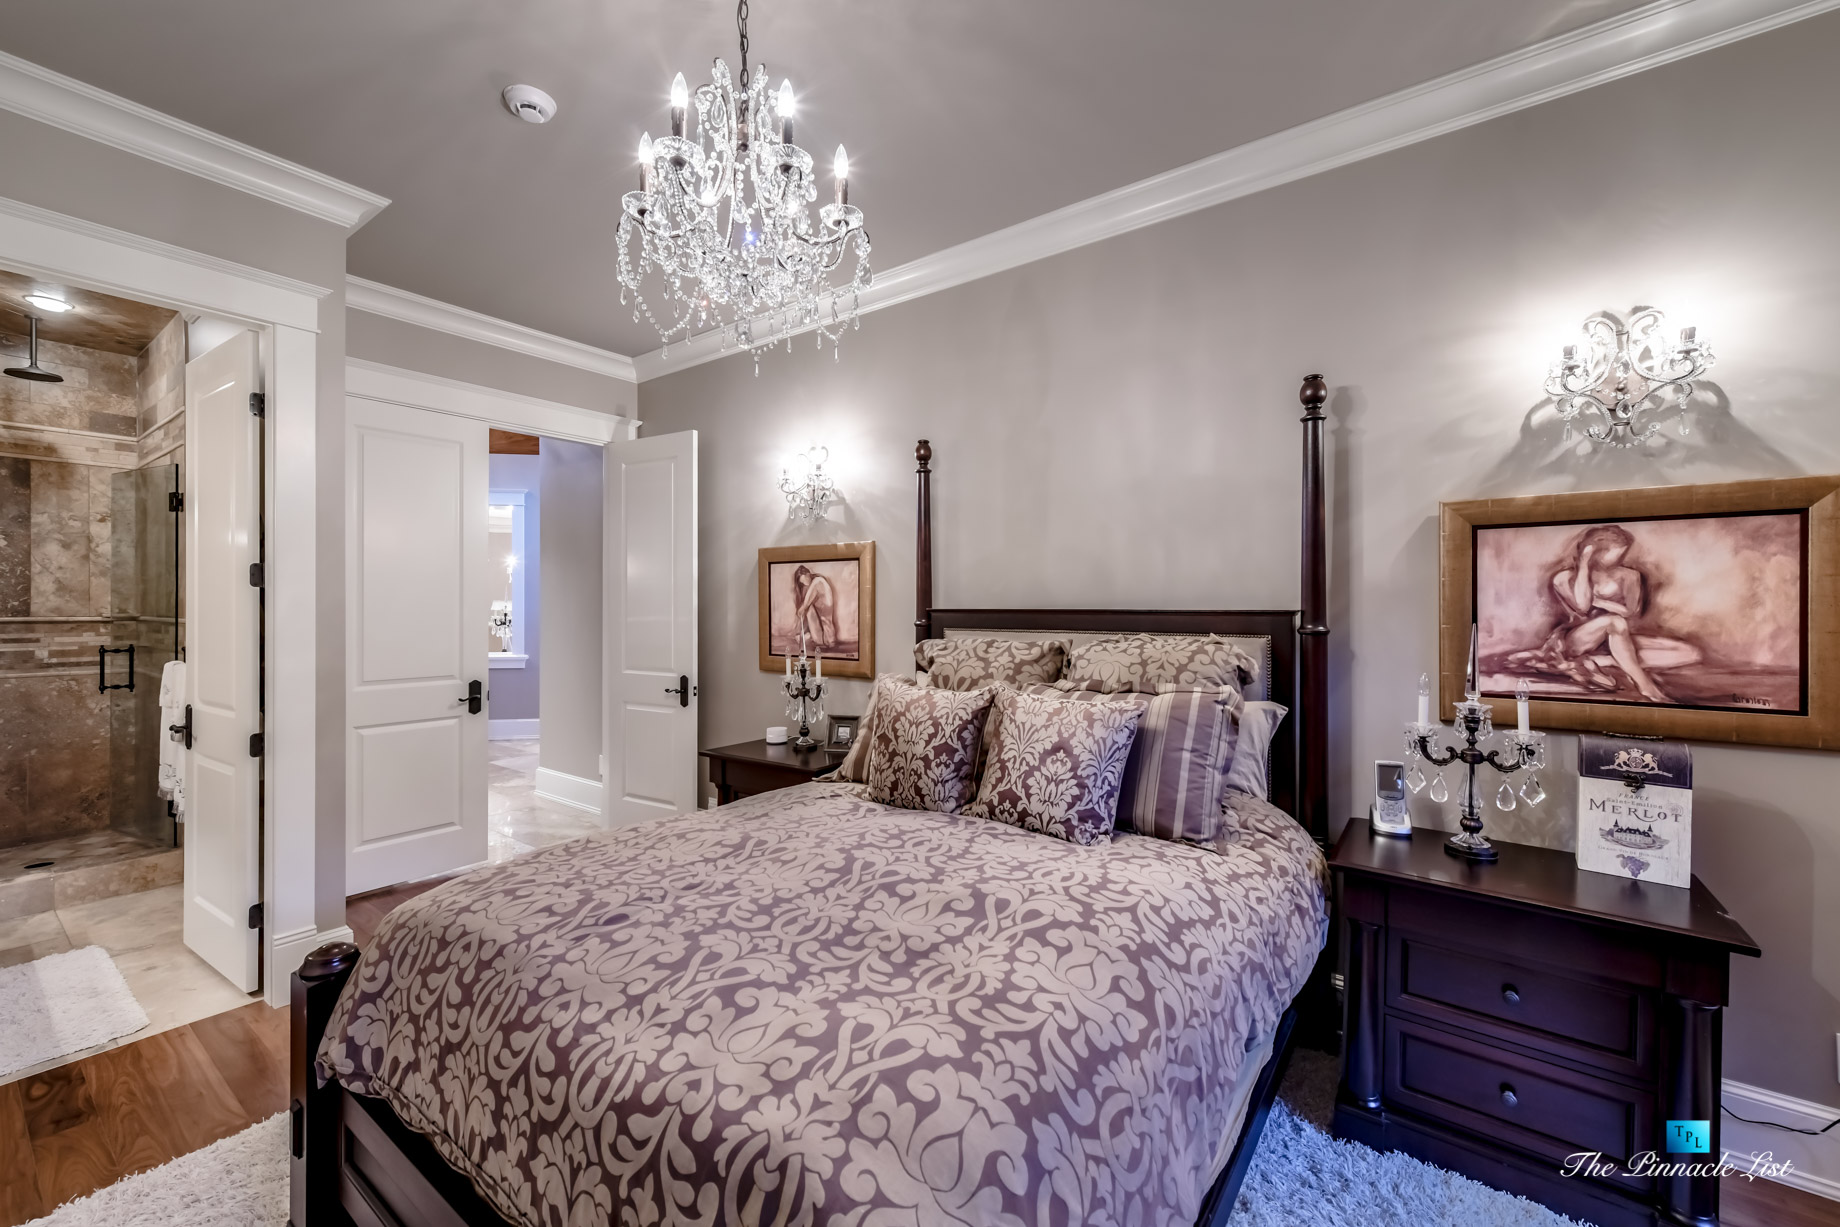 3053 Anmore Creek Way, Anmore, BC, Canada - Guest Bedroom - Luxury Real Estate - Greater Vancouver Home